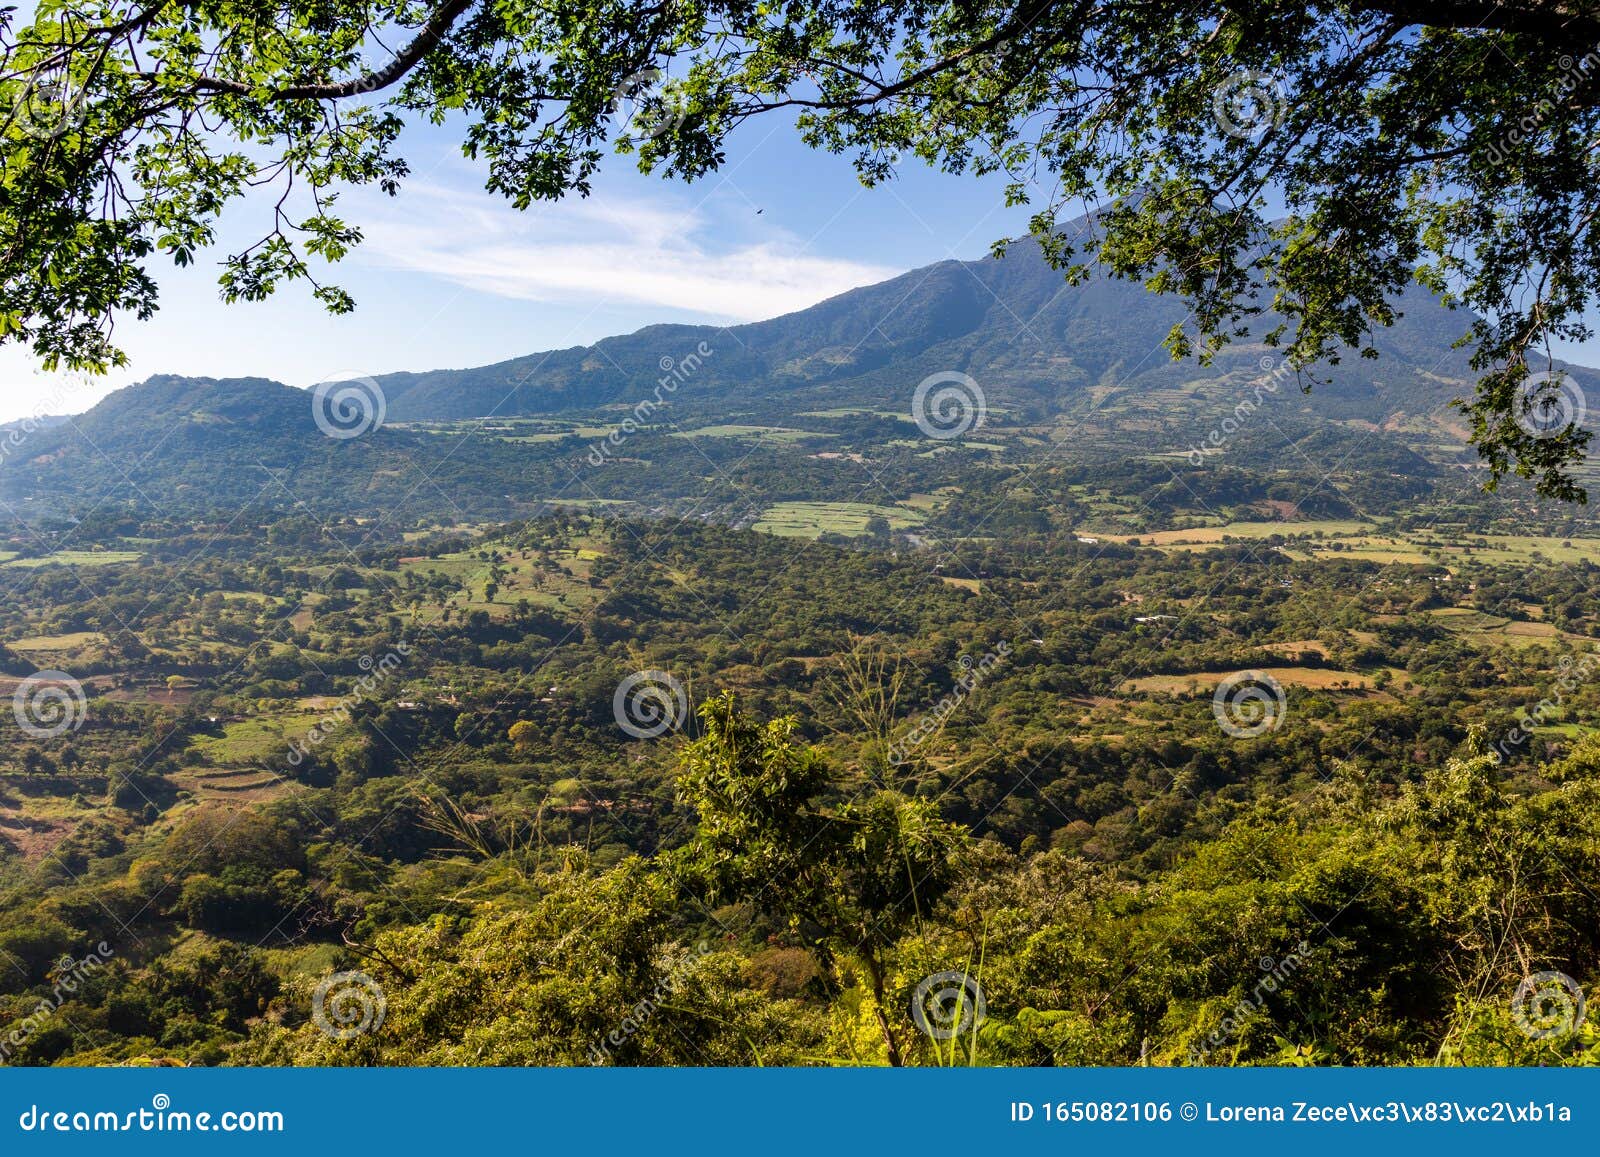 The Chinchontepec Volcano in San Vicente, El Salvador, Central America  Stock Photo - Image of daytime, field: 165082106